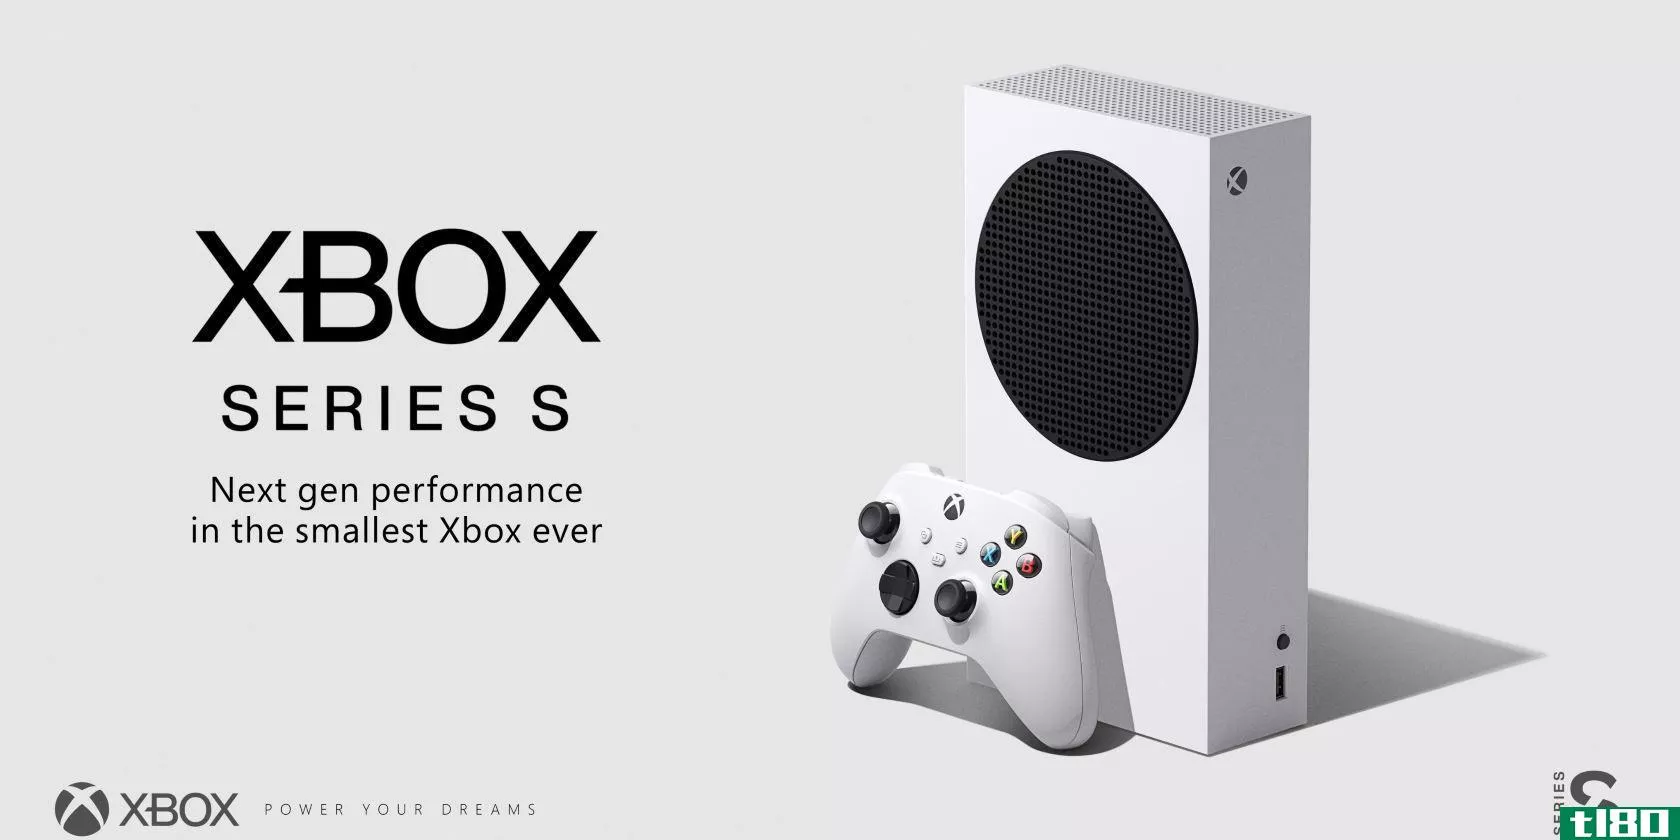 The Xbox Series S announcement image